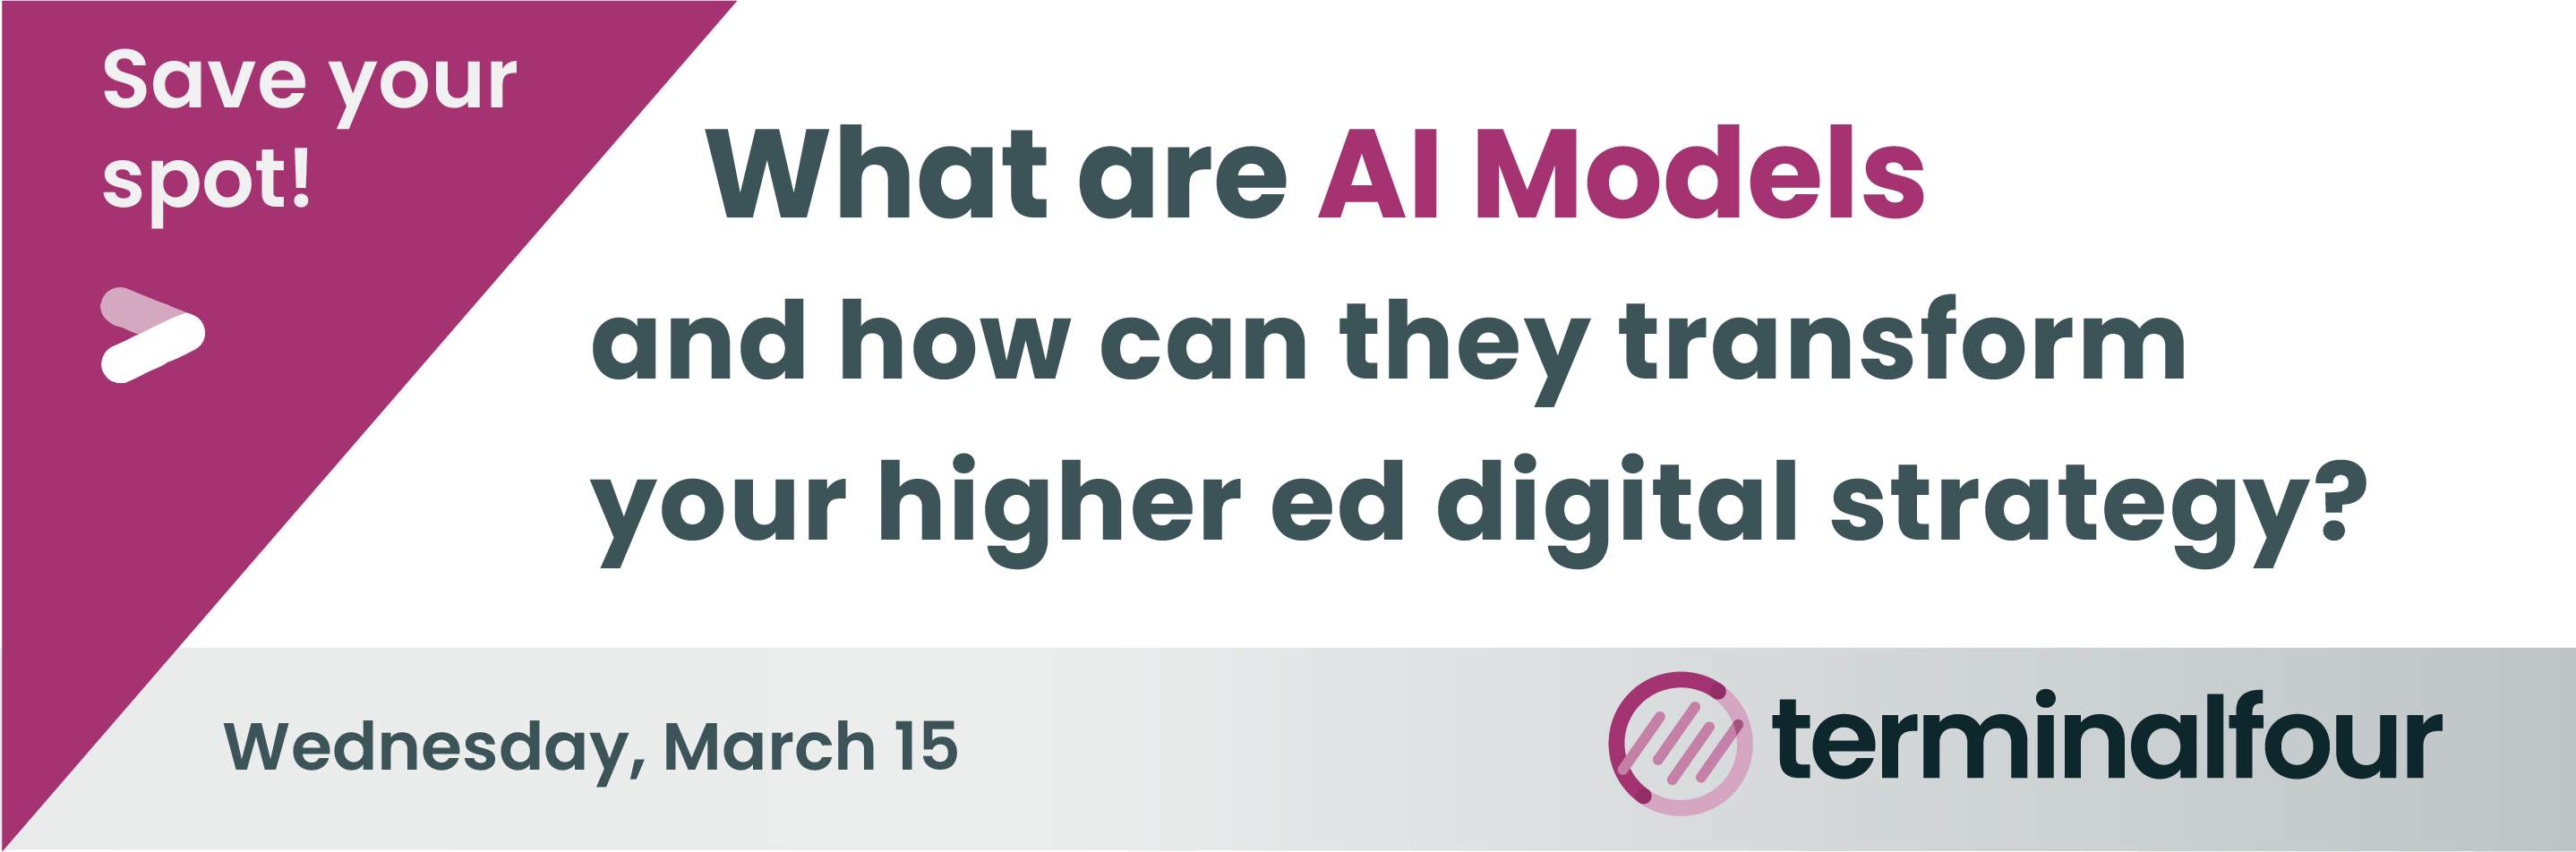 What are AI models and how can they help higher ed marketing